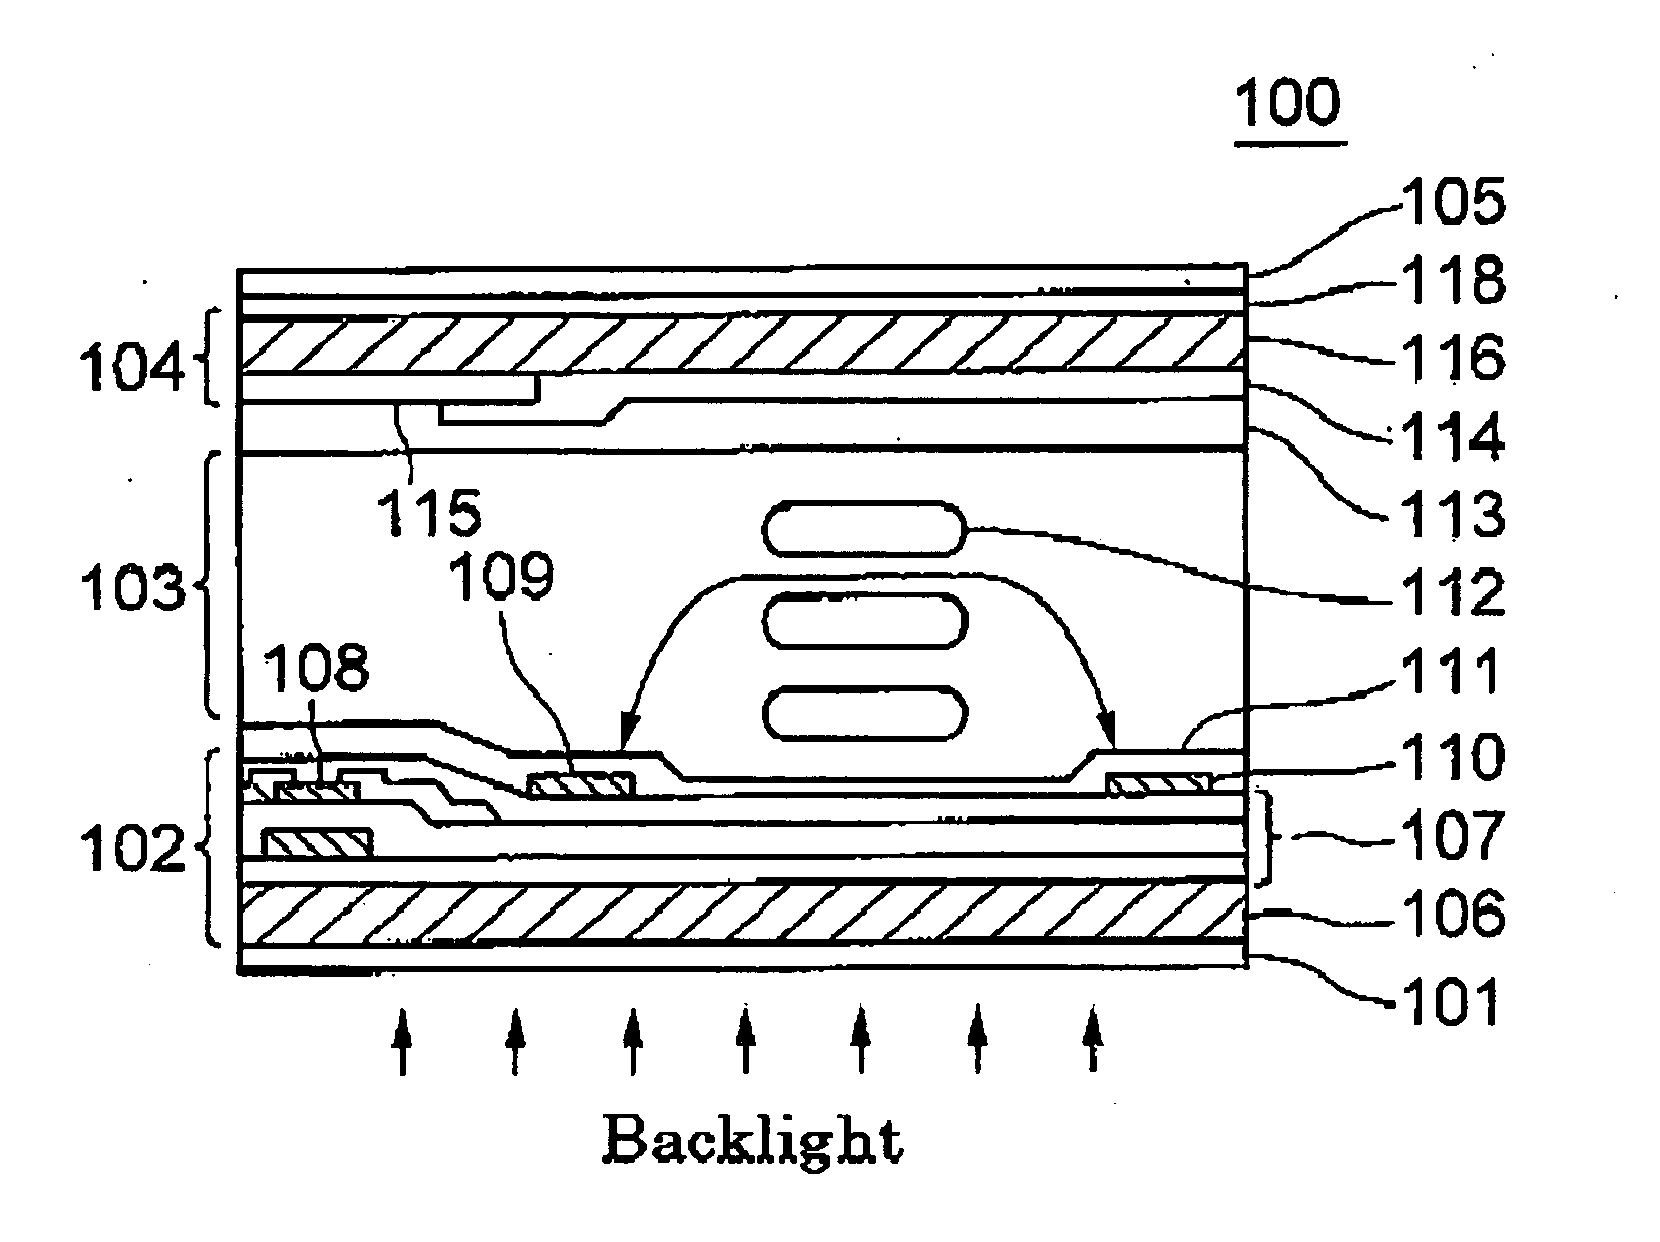 LCD device reducing asymmetry in the leakage light